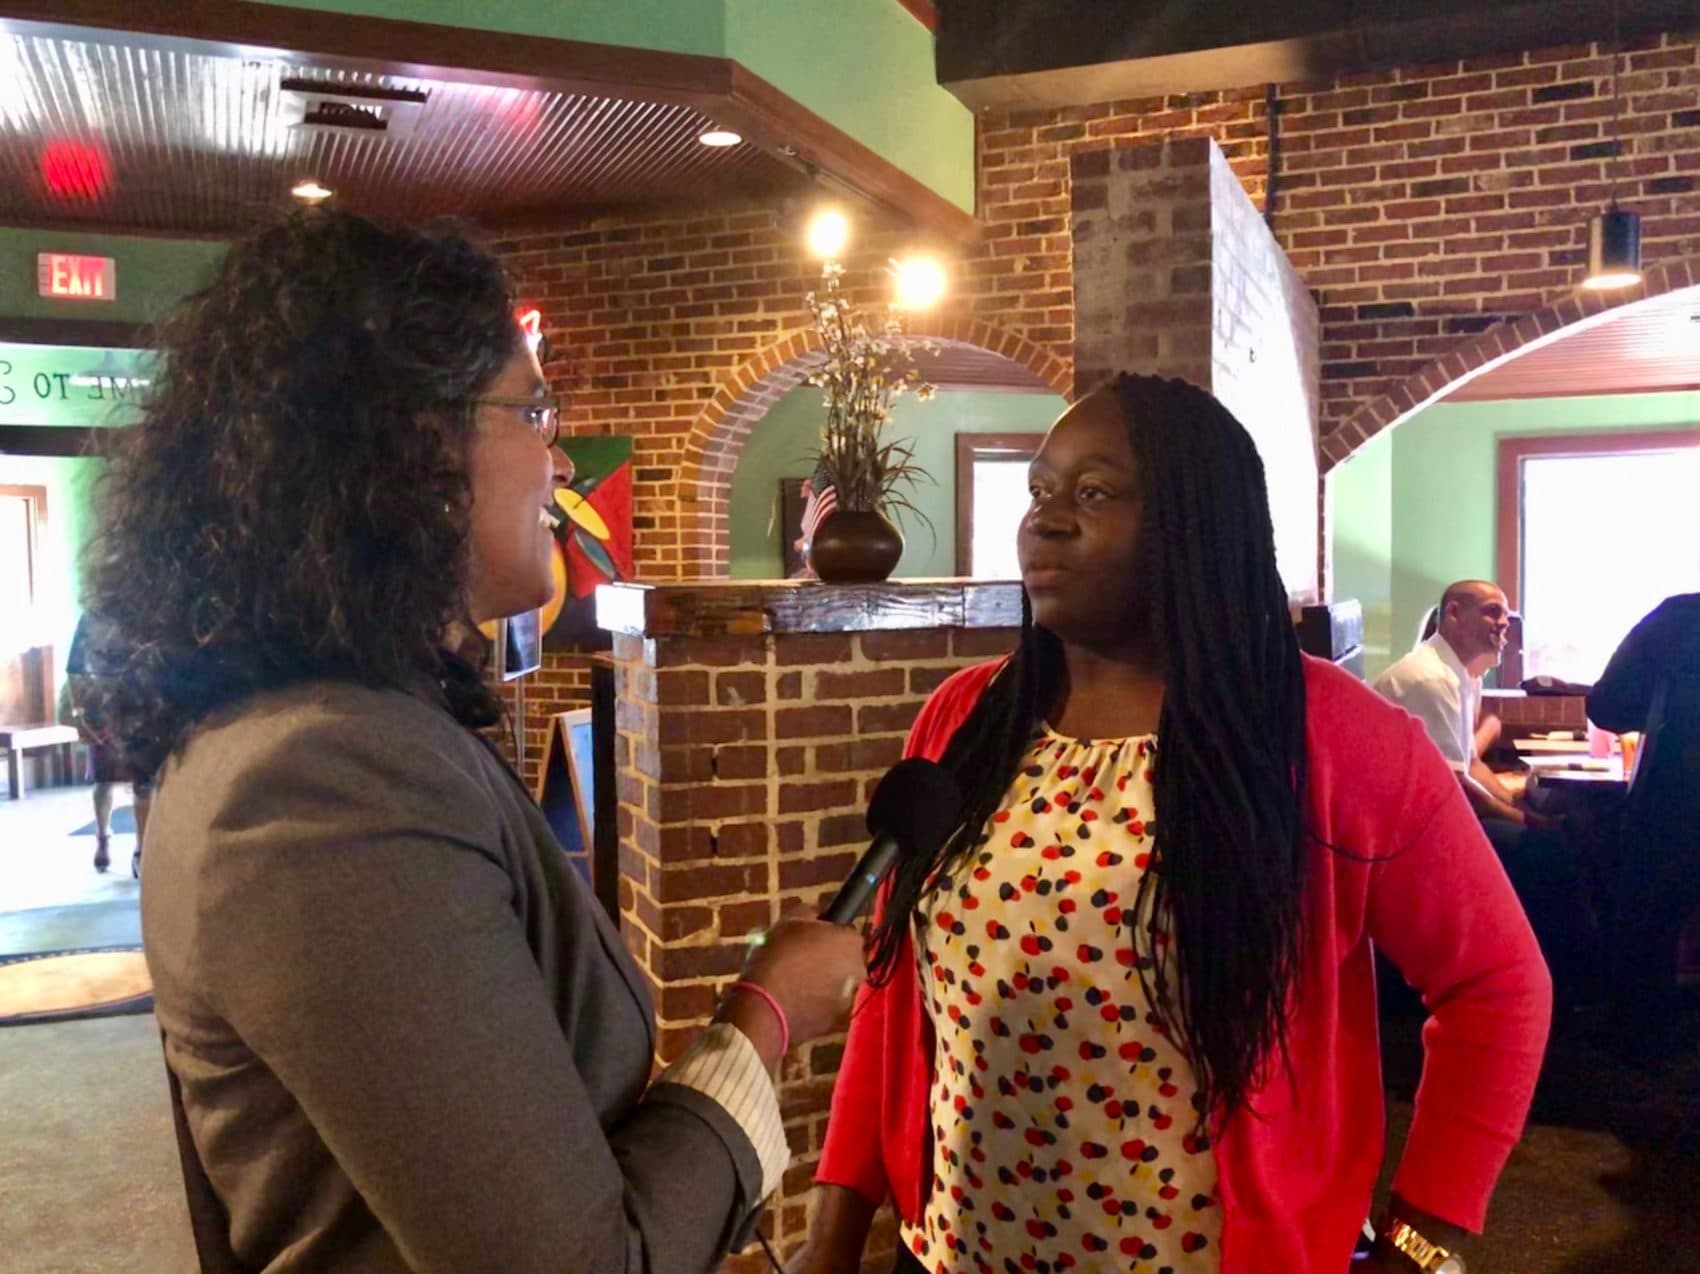 We also stopped at Kiki's Chicken and Waffles to speak with Kitwanda Cyrus herself. Her restaurant has become an unofficial stop for presidential hopefuls coming through Columbia. (Anna Bauman/On Point)